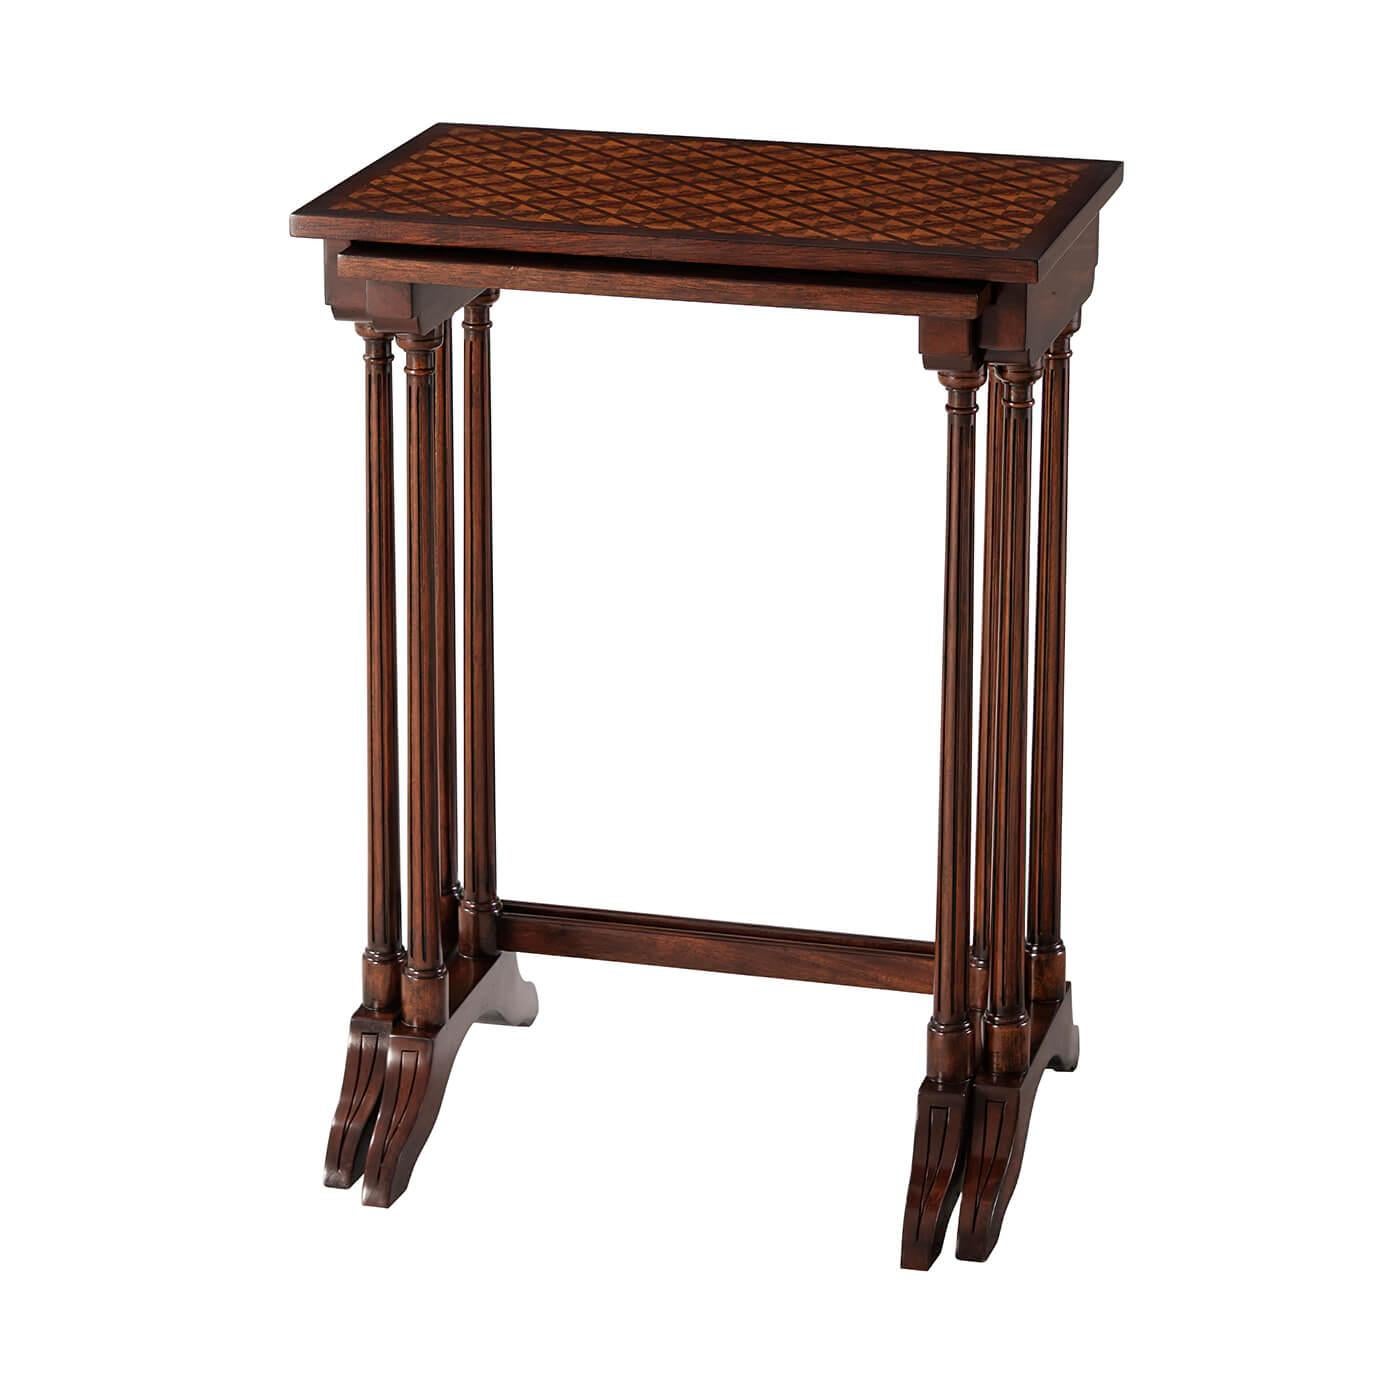 Regency inlaid nest of tables a mahogany and burl lattice parquetry nest of two tables, with turned end supports and on splay feet.

Dimensions: 19.25